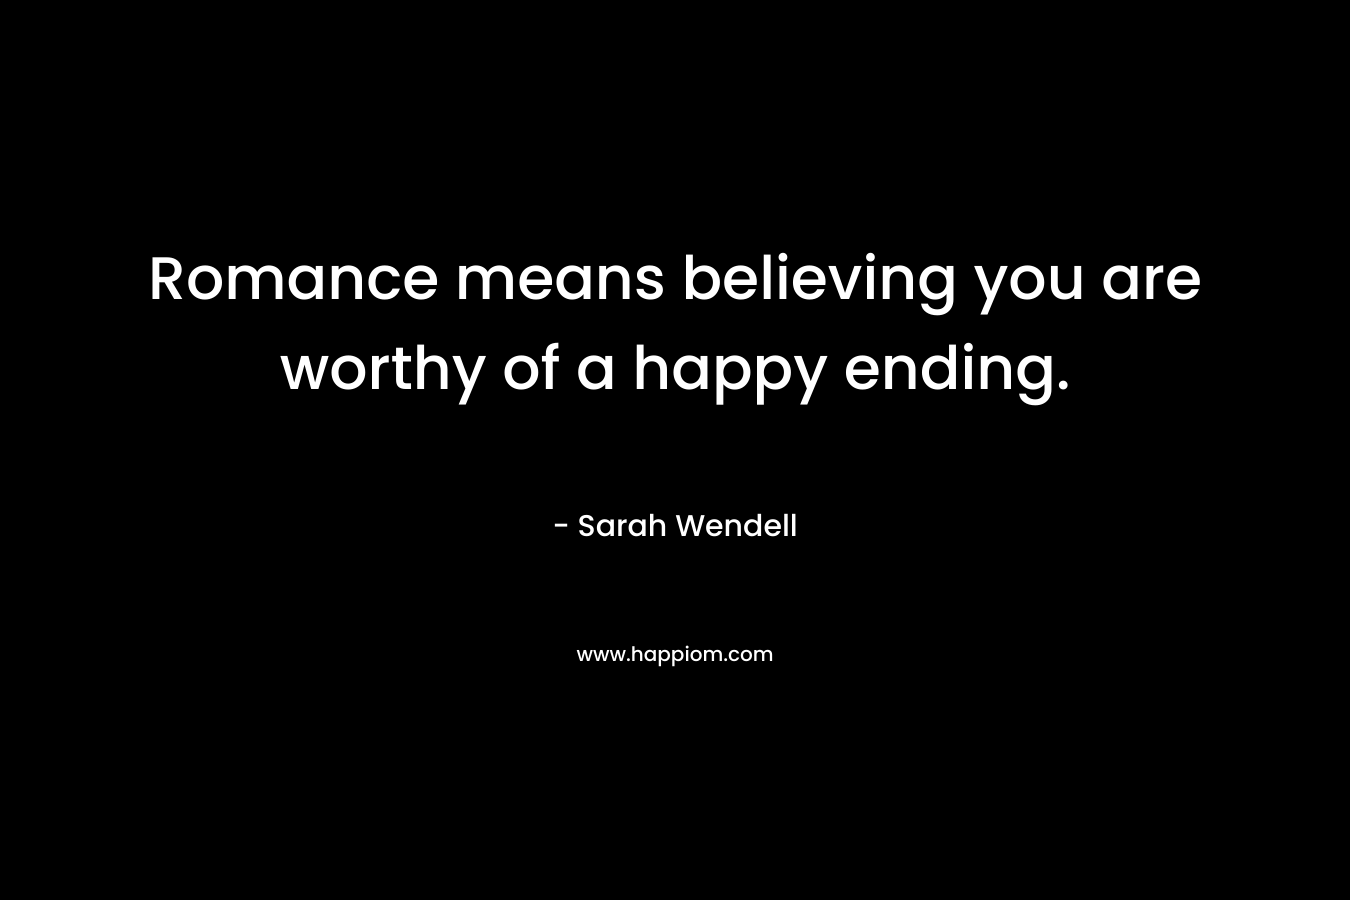 Romance means believing you are worthy of a happy ending.